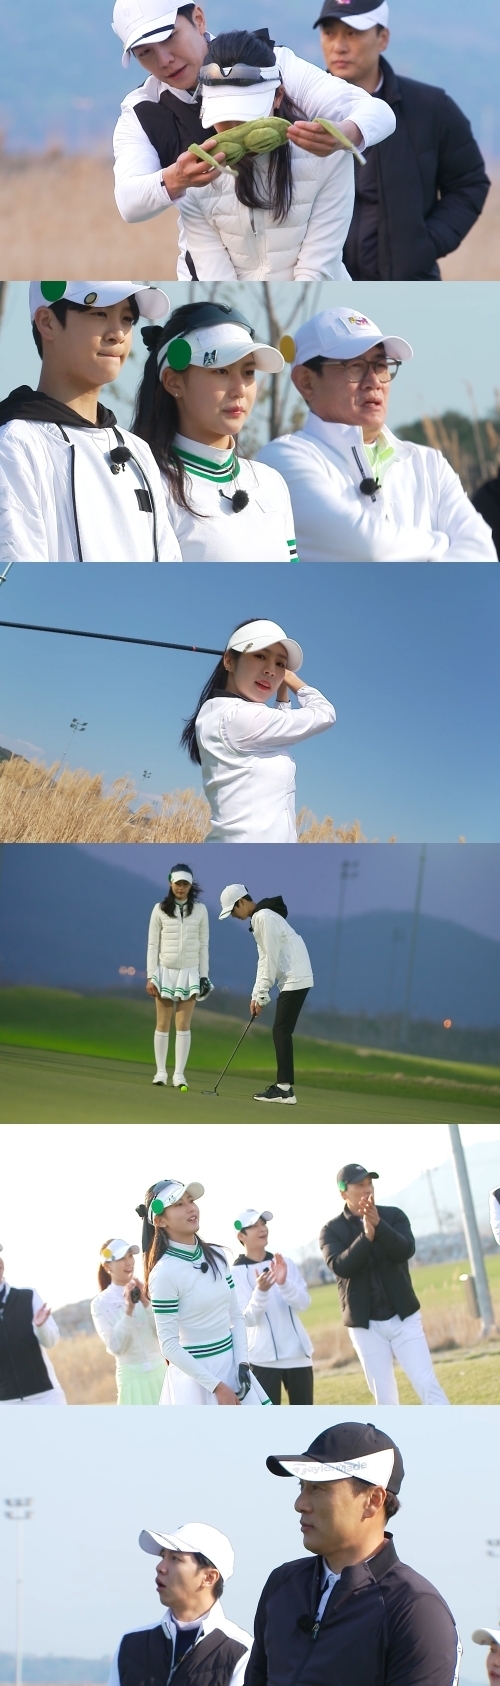 Song Ji-ah, who appeared as a friend of singer Jung Dong-won, revealed his fanship for Lee Seung-gi.In Season 3 of SBSs Eat and Gonchiri (072) broadcast on May 7, there will be a Golf showdown featuring the rich (child), actor Kwak Do-won and singer Jung Dong-won.On the day, the two of them appeared in a surprise appearance by Friend and performed a friendship round together.Friend of Kwak Do-won starred cheerleader Park Gi-ryang; the two surprised the crowd by saying, I saw it five years ago at the Pusan ​​International Film Festival and saw it for the second time today.On the other hand, Park Ki-ryang expressed his affection for Golf, saying, It is a strength that is better than ordinary people. It is not hard to go around 18 holes, and I have practiced to break my hands.At the end of the Score question, Park said, It was a while after the back stone escaped. Lee Kyoung-kyu said, I do not feel comfortable with Park Ki-ryang.A few moments later, in the field, a Twin T-shot hole was held, where they tee shot each other.Kwak Do-won and Park Ki-ryang had a time to exchange their eyes before the pair tee shot, and it is the back door that everyone watched the tee shot of the two people with their breathless pink air flowing.Meanwhile, Jung Dong-wons Friend starred Song Ji-ah, who is preparing for a professional golfer.Prior to the showdown, Song Ji-ah revealed he had a 68-shot Rabe in battery training some time ago.Lee Kyoung-kyu said, I would have given you a few faraways.Song Ji-ah said, I liked Lee Seung-gi when I saw the drama, he said, because of Lee Seung-gi.Despite all the dissuades around him, Lee Seung-gi can cover all the slices, he said, drawing him as a team member and showing a steaming fan.Lee Seung-gi said, I finally got my fan, I will show you a dramatic game.